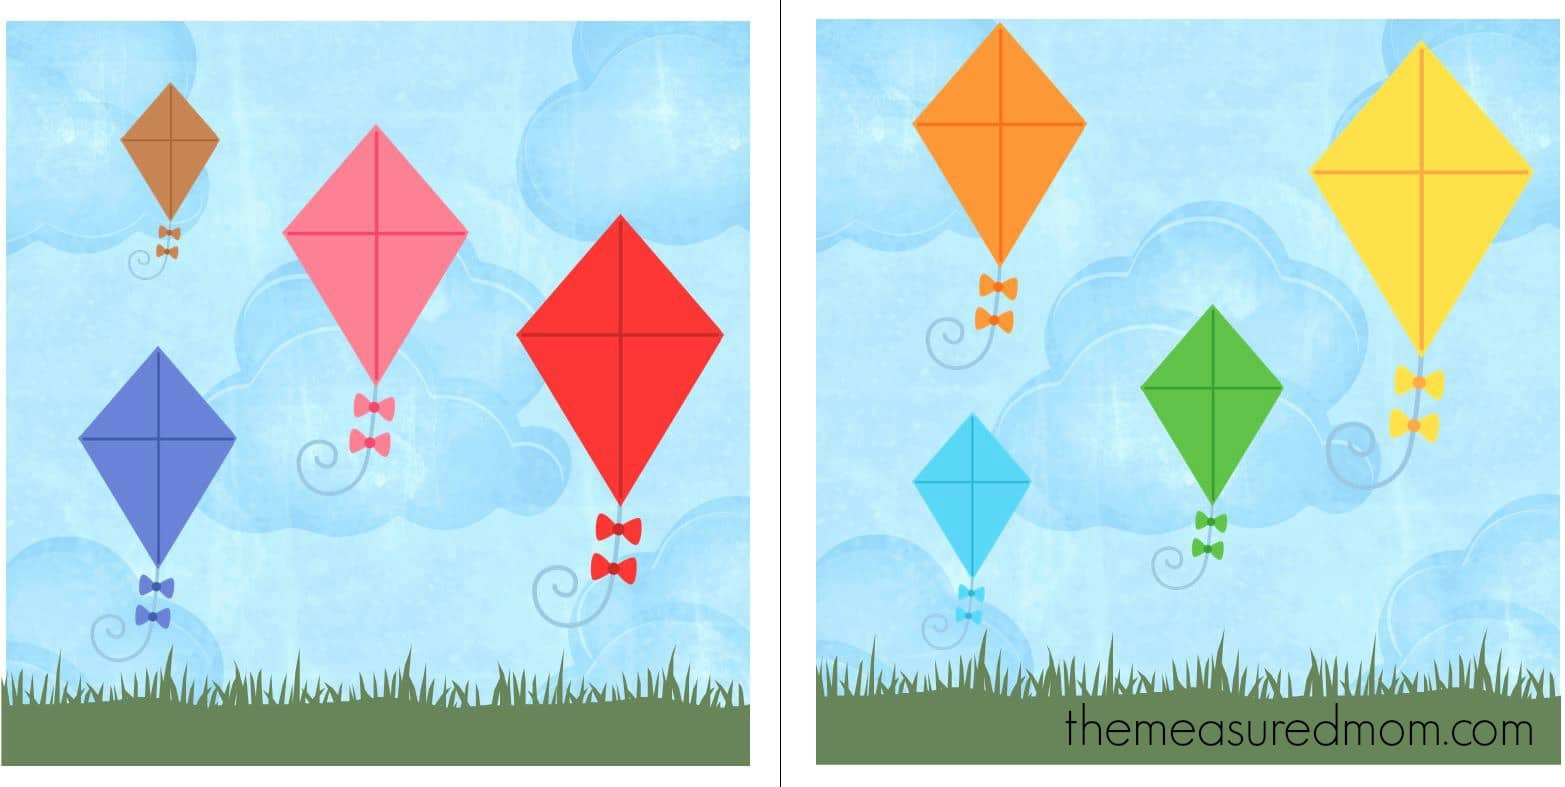 Free File Folder Game For Preschoolers: Kites! - The Measured Mom with Free Printable Math File Folder Games For Preschoolers